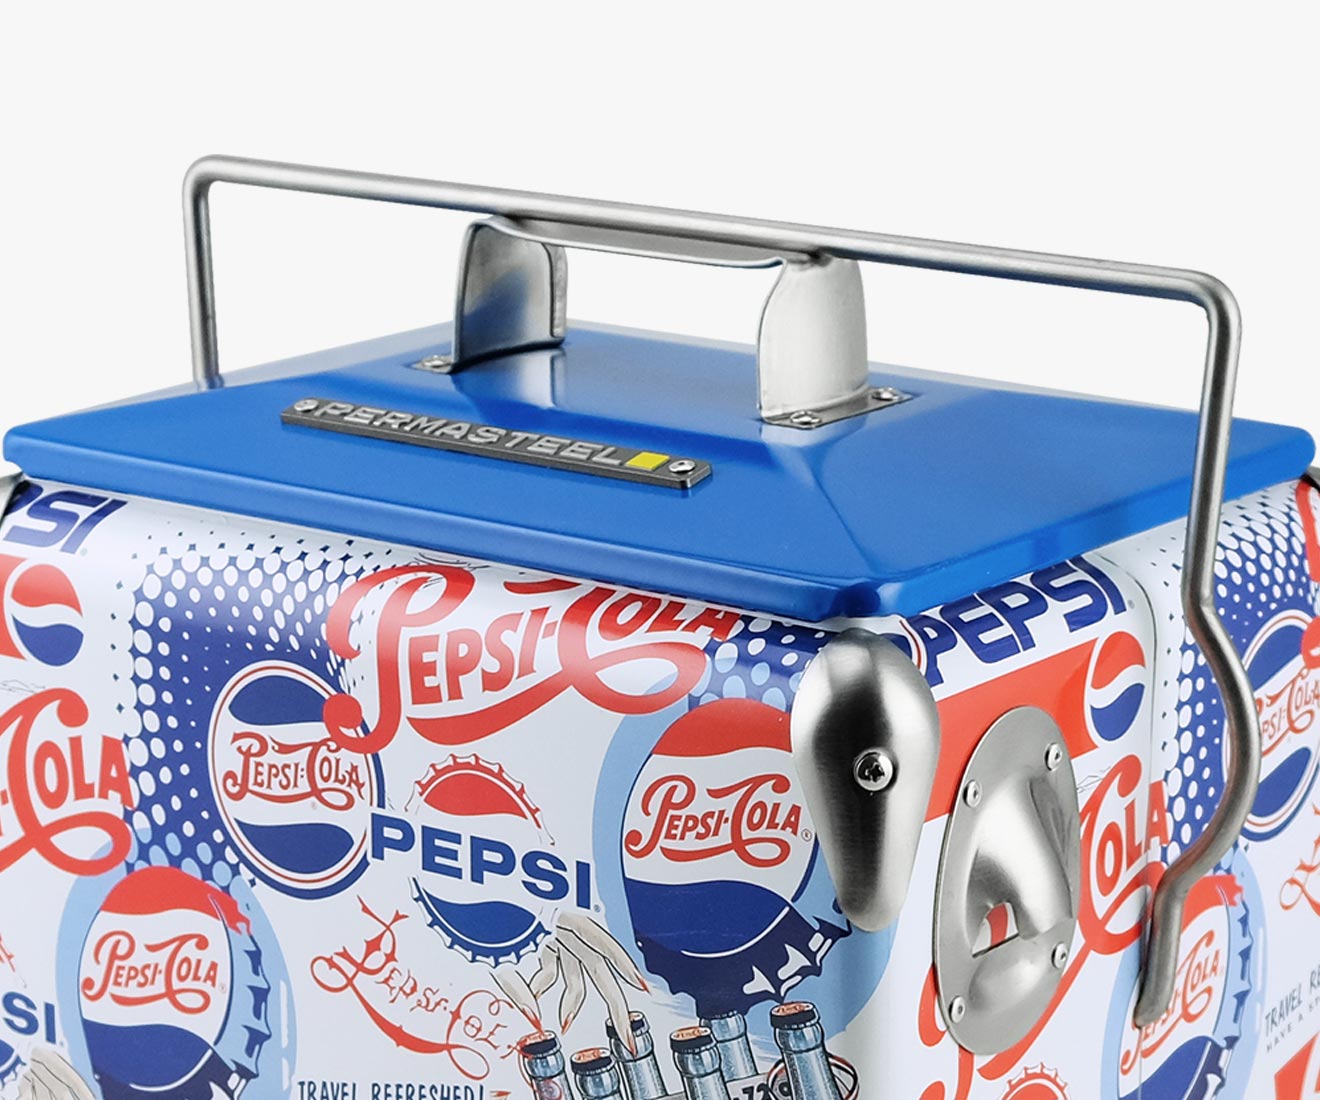 Pepsi 14-Quart Small Portable Picnic Cooler with Old Vintage Pepsi Logos Officially Licensed Cooler Personal Cooler Product Features Image 3